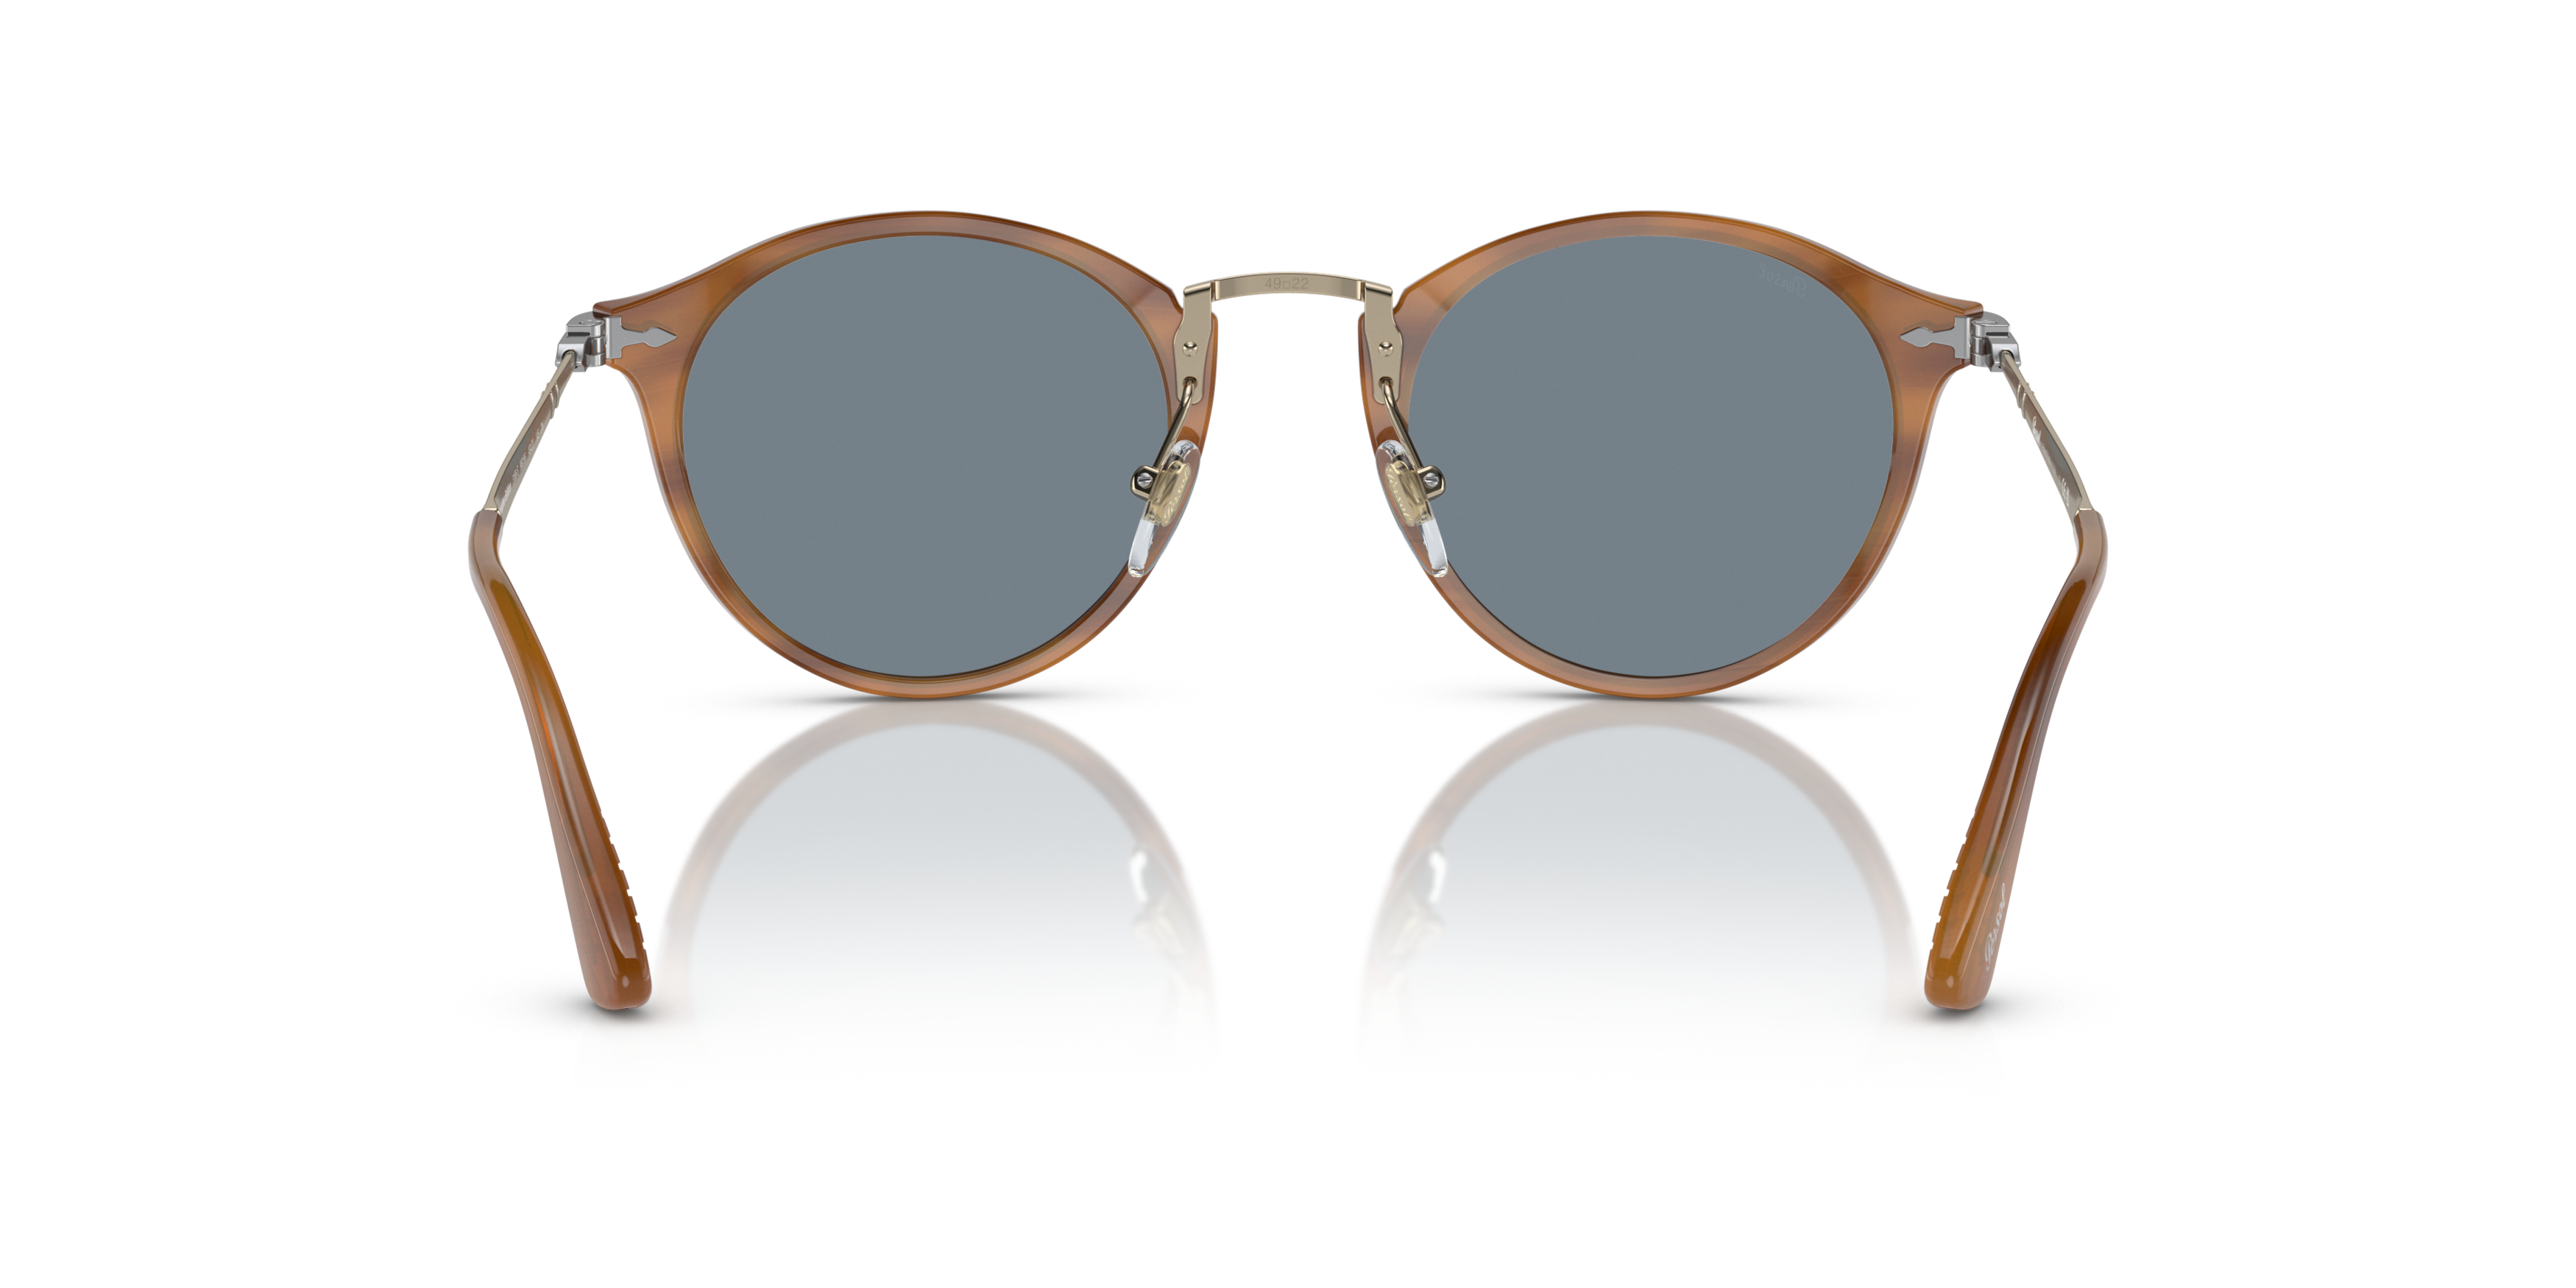 [products.image.detail02] PERSOL PO3166S 960/56